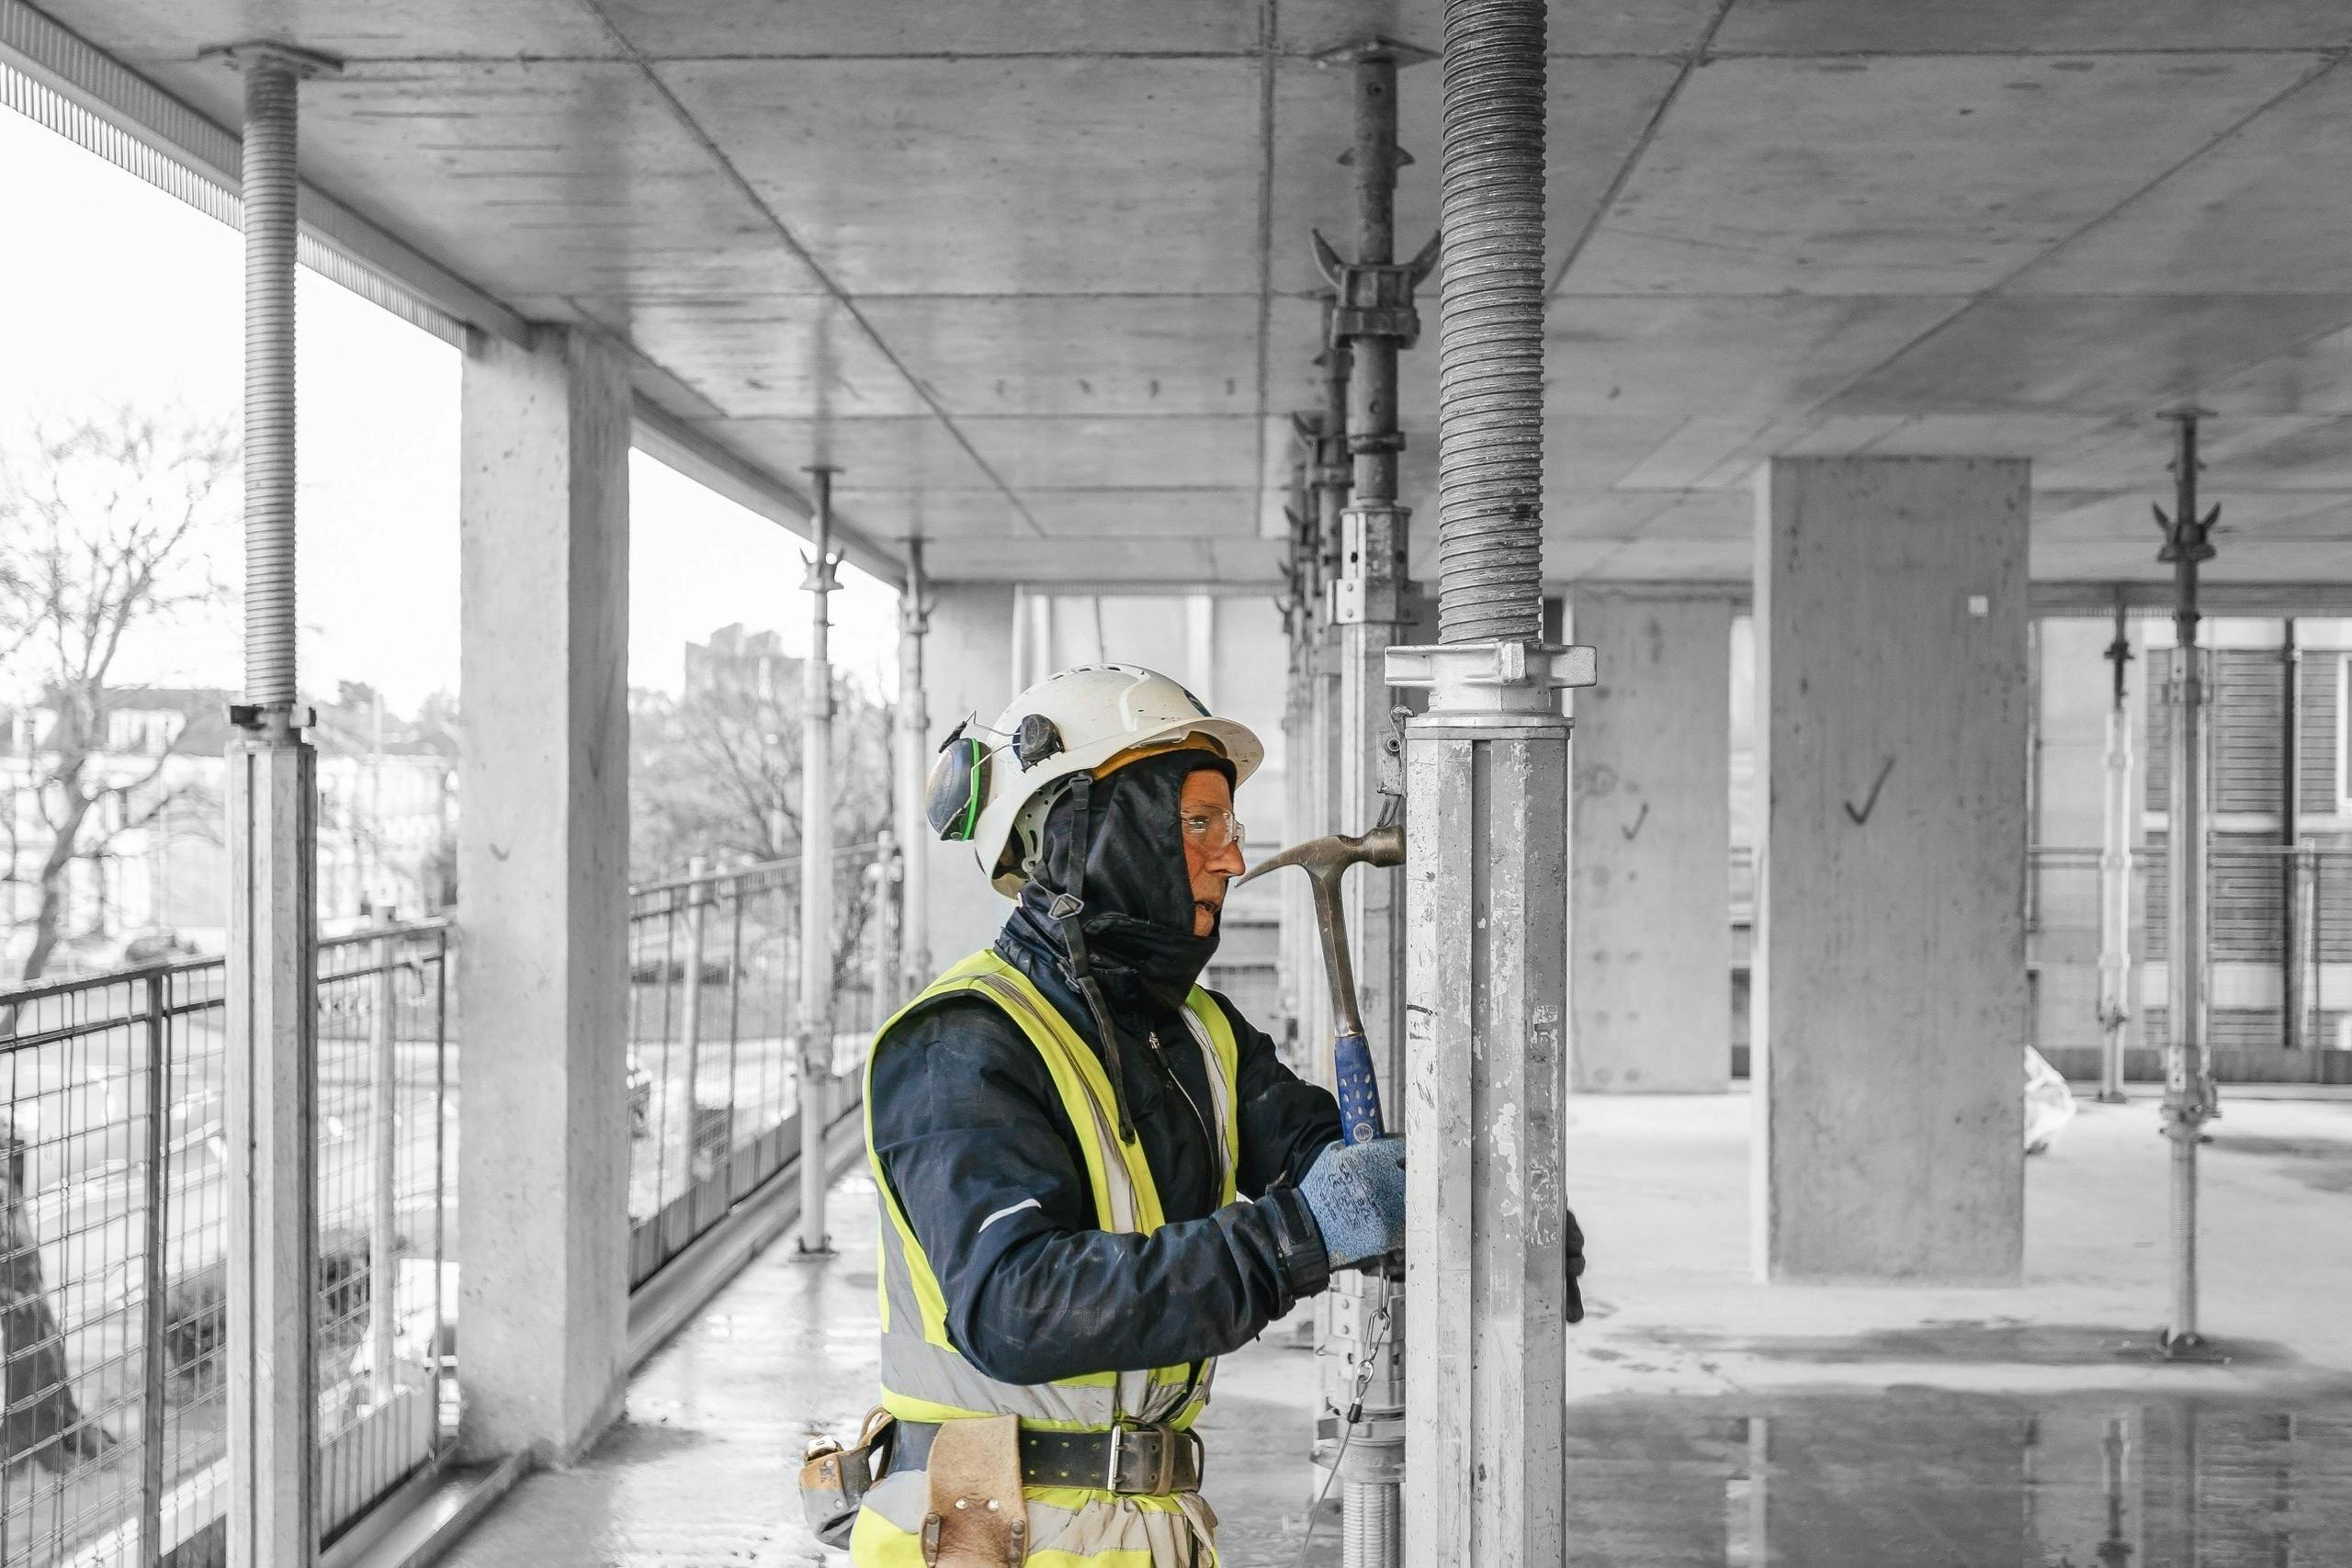 Man working on construction site wearing protective clothing using a hammer on scaffolding